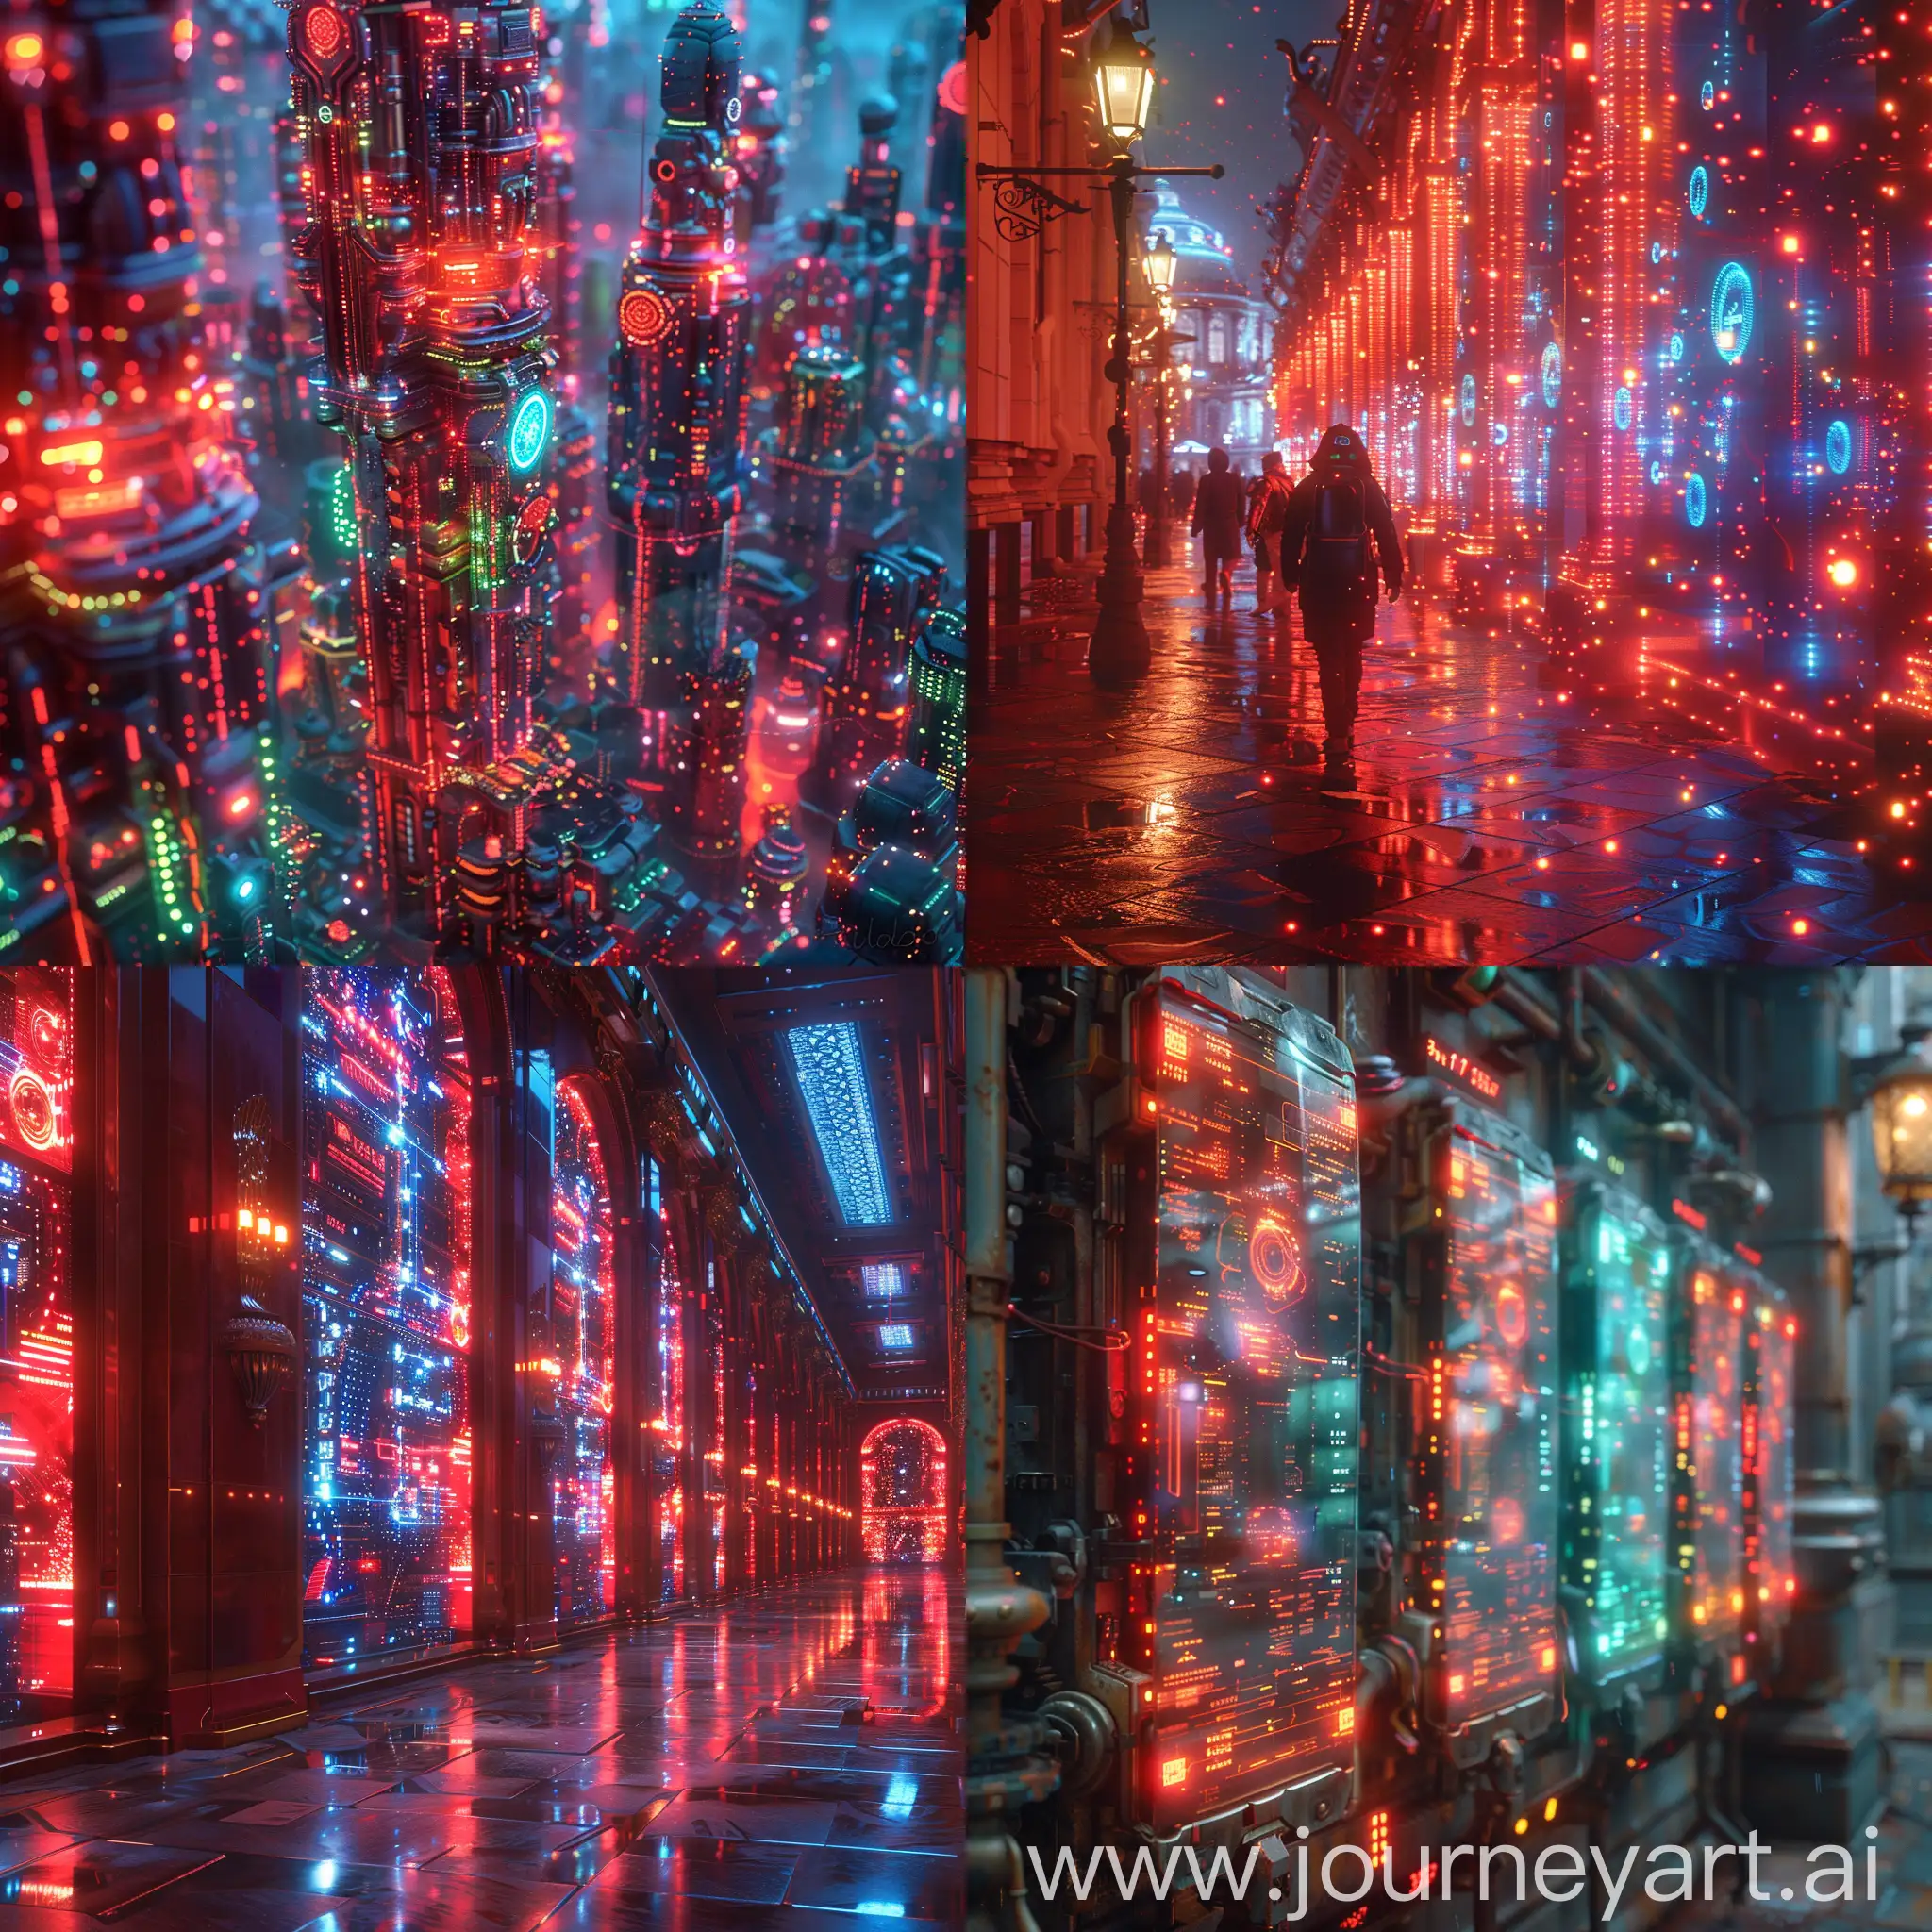 Futuristic-Saint-Petersburg-Vibrant-Holographic-Cityscape-in-HighTech-Style